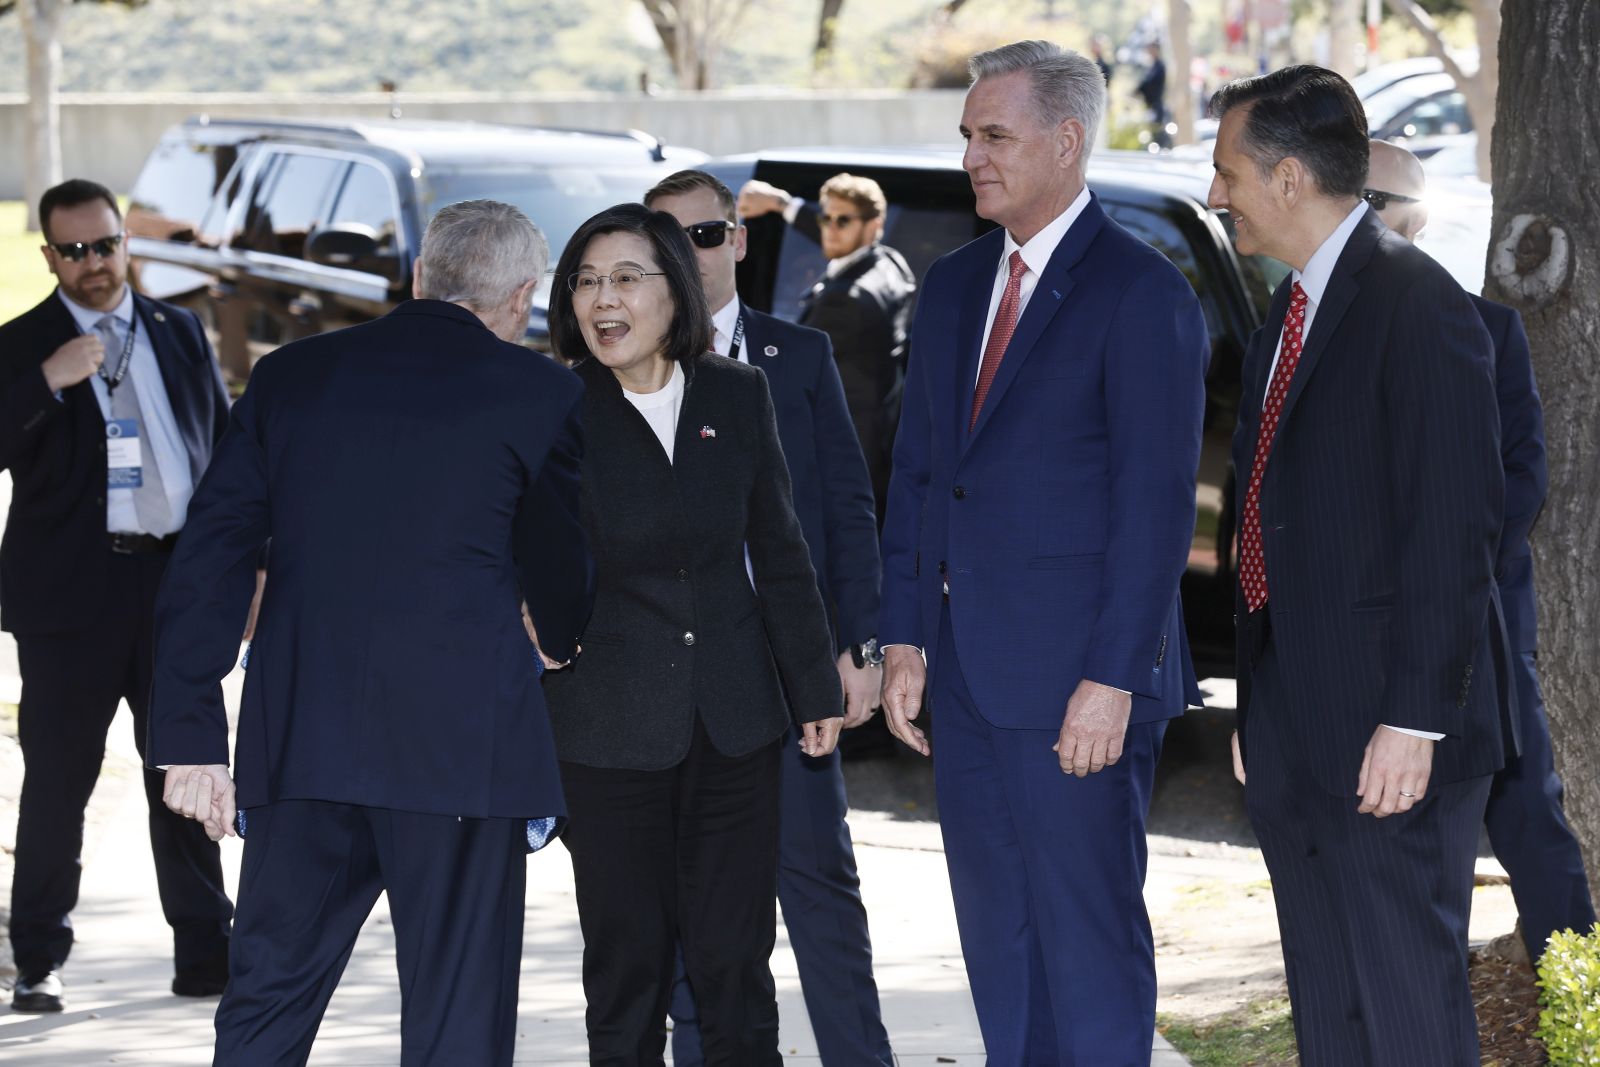 epa10560106 US Speaker of the House Kevin McCarthy (2R) greets President Tsai Ing-wen of Taiwan (2L) on arrival for a meeting at the Ronald Reagan Presidential Library in Simi Valley, California, USA, 05 April 2023. Tsai's visit was a stop on her way home from a visit to Latin America.  EPA/ETIENNE LAURENT